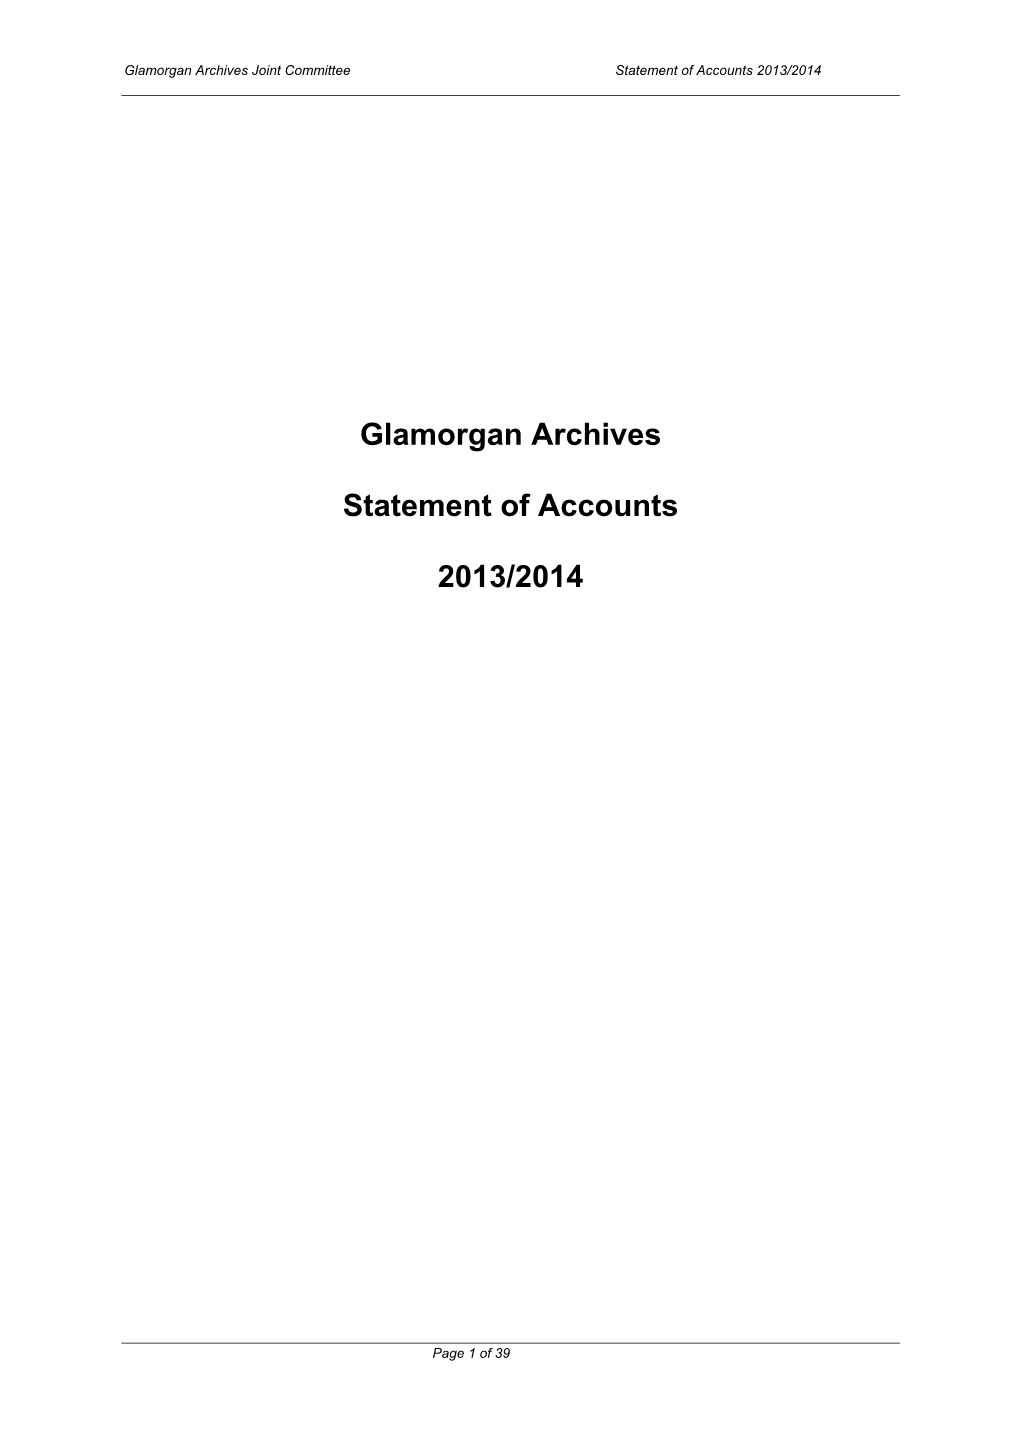 Glamorgan Archives Statement of Accounts 2013/2014